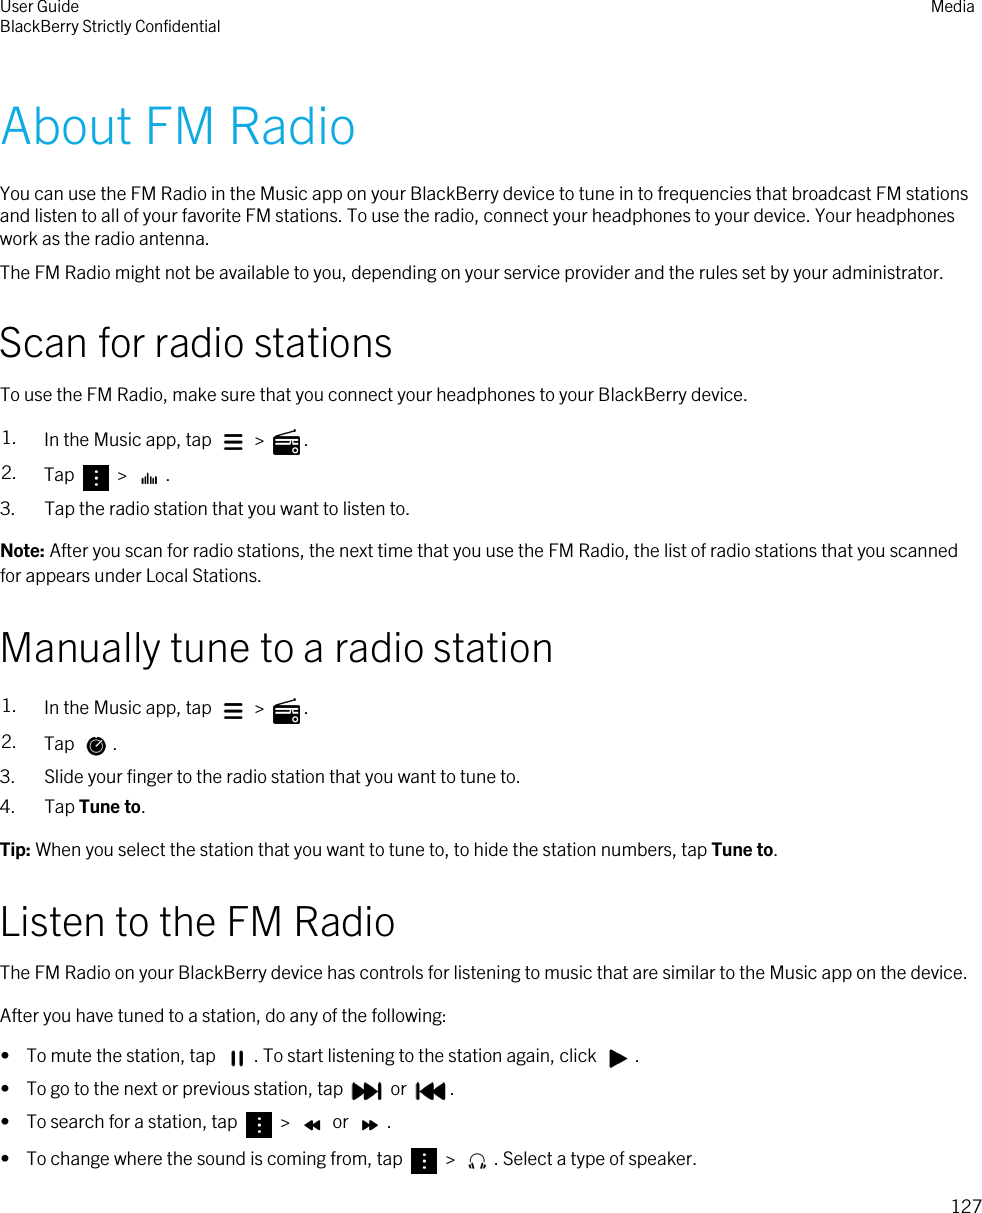 About FM RadioYou can use the FM Radio in the Music app on your BlackBerry device to tune in to frequencies that broadcast FM stations and listen to all of your favorite FM stations. To use the radio, connect your headphones to your device. Your headphones work as the radio antenna.The FM Radio might not be available to you, depending on your service provider and the rules set by your administrator.Scan for radio stationsTo use the FM Radio, make sure that you connect your headphones to your BlackBerry device.1. In the Music app, tap   &gt;  .2. Tap   &gt;  .3. Tap the radio station that you want to listen to.Note: After you scan for radio stations, the next time that you use the FM Radio, the list of radio stations that you scanned for appears under Local Stations.Manually tune to a radio station1. In the Music app, tap   &gt;  .2. Tap  .3. Slide your finger to the radio station that you want to tune to.4. Tap Tune to.Tip: When you select the station that you want to tune to, to hide the station numbers, tap Tune to.Listen to the FM RadioThe FM Radio on your BlackBerry device has controls for listening to music that are similar to the Music app on the device.After you have tuned to a station, do any of the following:•  To mute the station, tap  . To start listening to the station again, click  .•  To go to the next or previous station, tap   or  .•  To search for a station, tap   &gt;   or  .•  To change where the sound is coming from, tap   &gt;  . Select a type of speaker.User GuideBlackBerry Strictly Confidential Media127